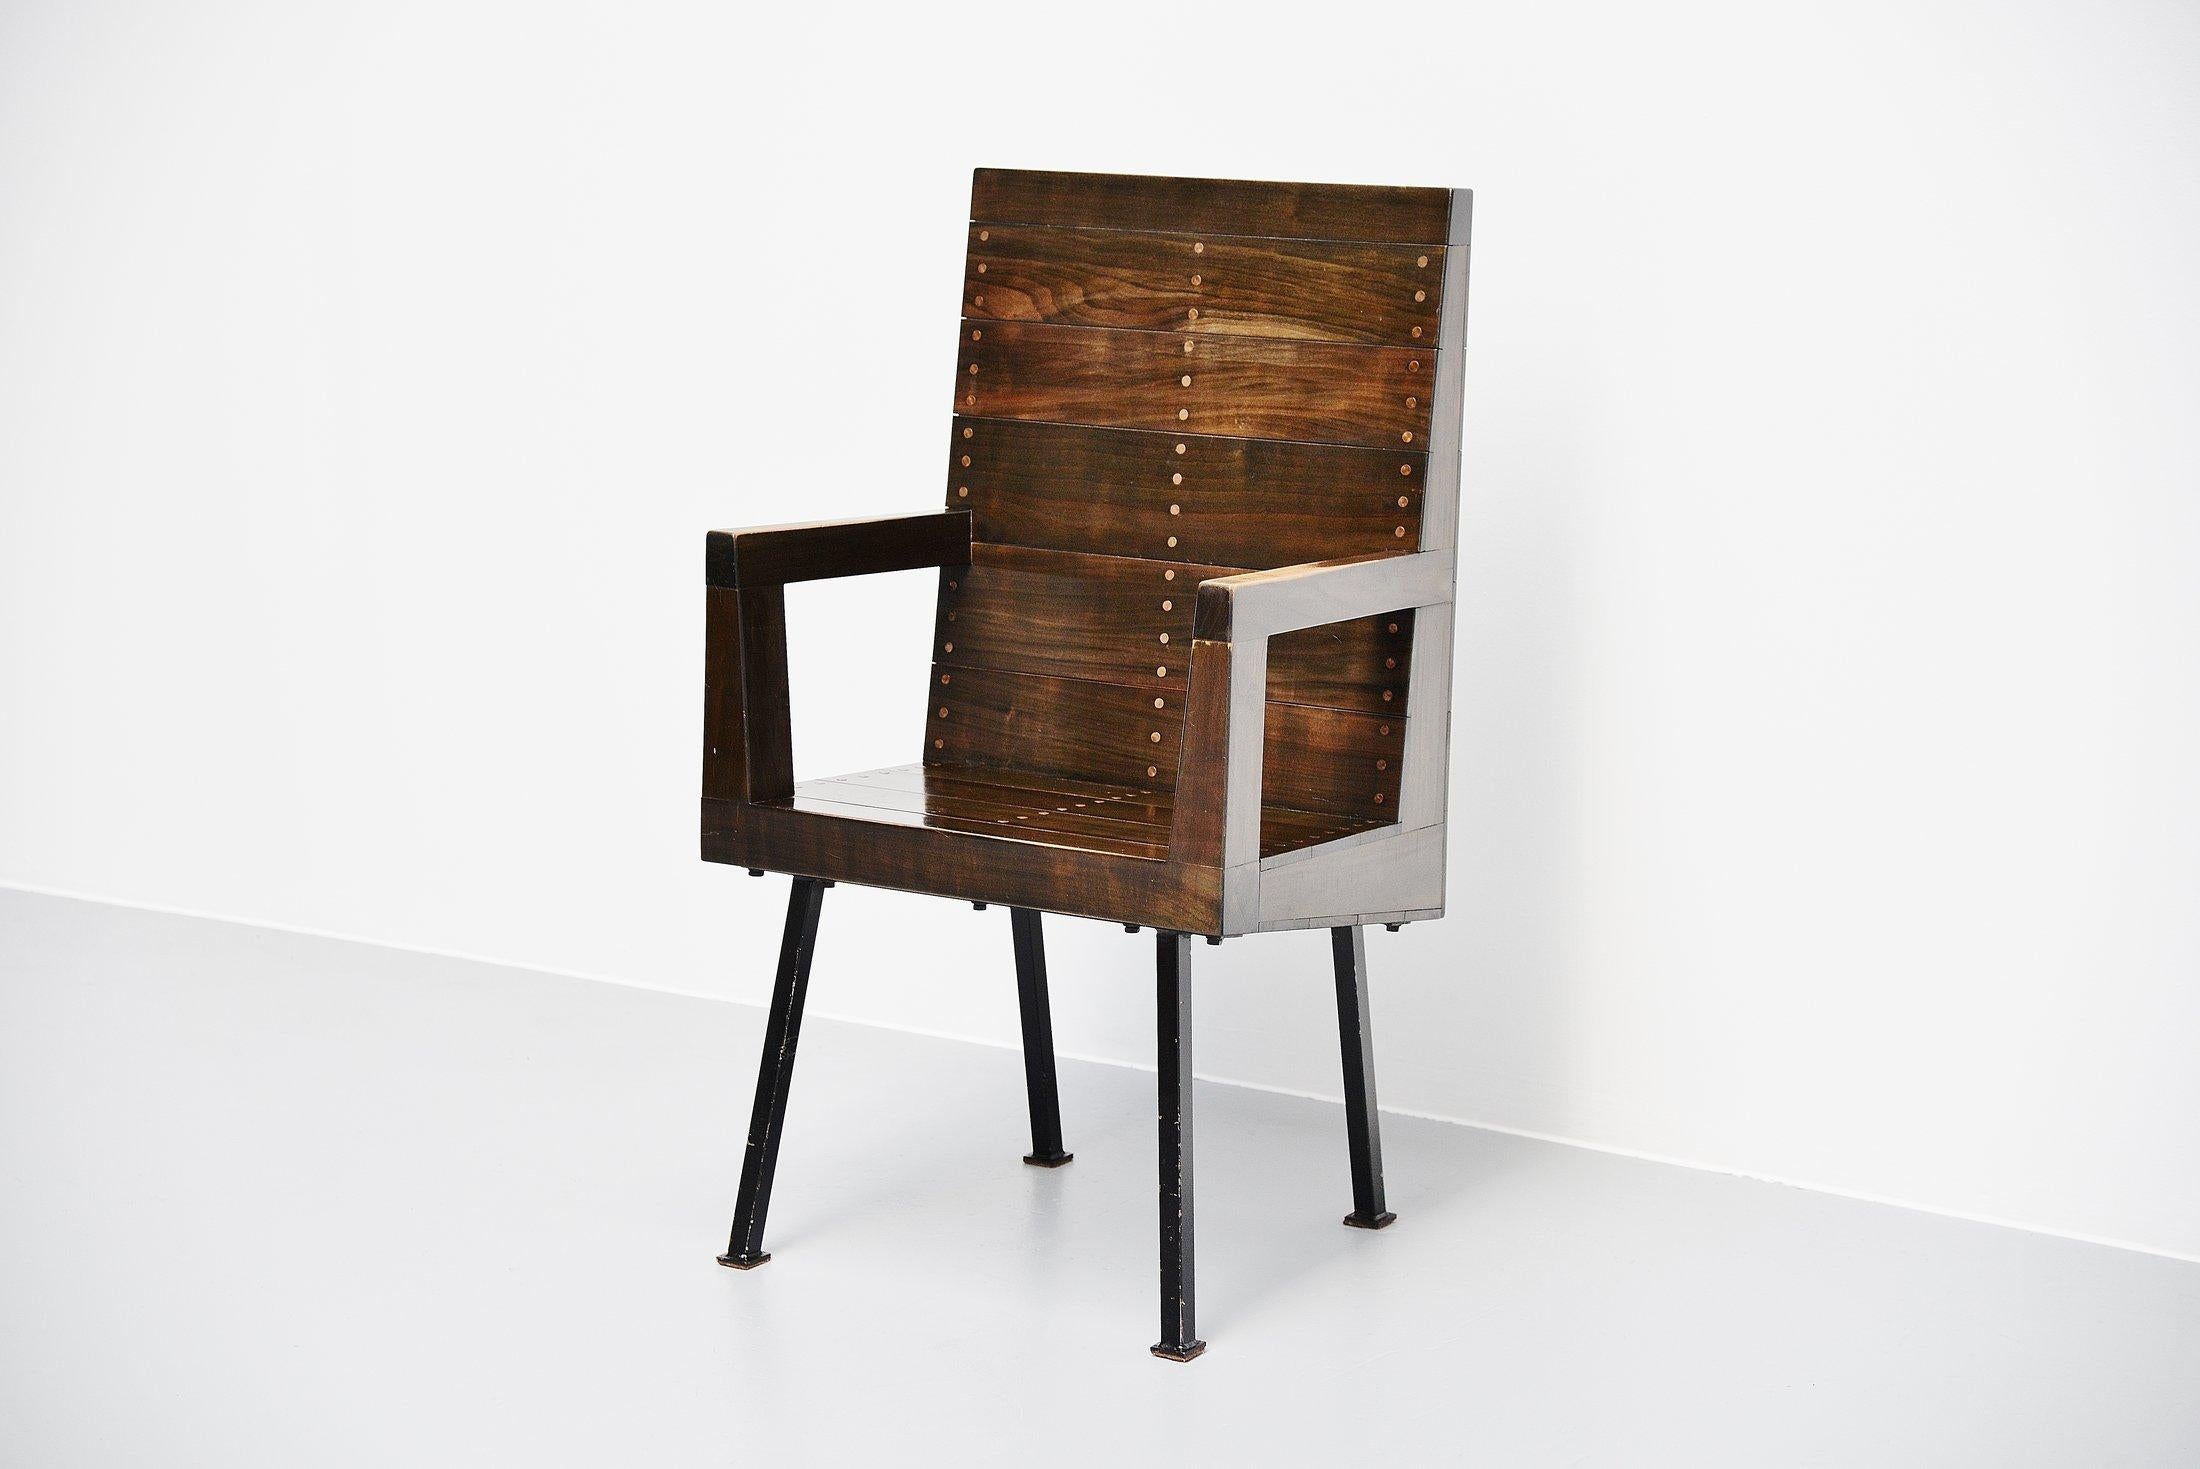 Rare and amazing high chair designed by Dom Hans van der Laan and executed by Jan de Jong for the Raadhuis Budel, 1962/1966. This chair comes from the town hall where Jan de Jong was the architect for and who decorated this town hall, also this